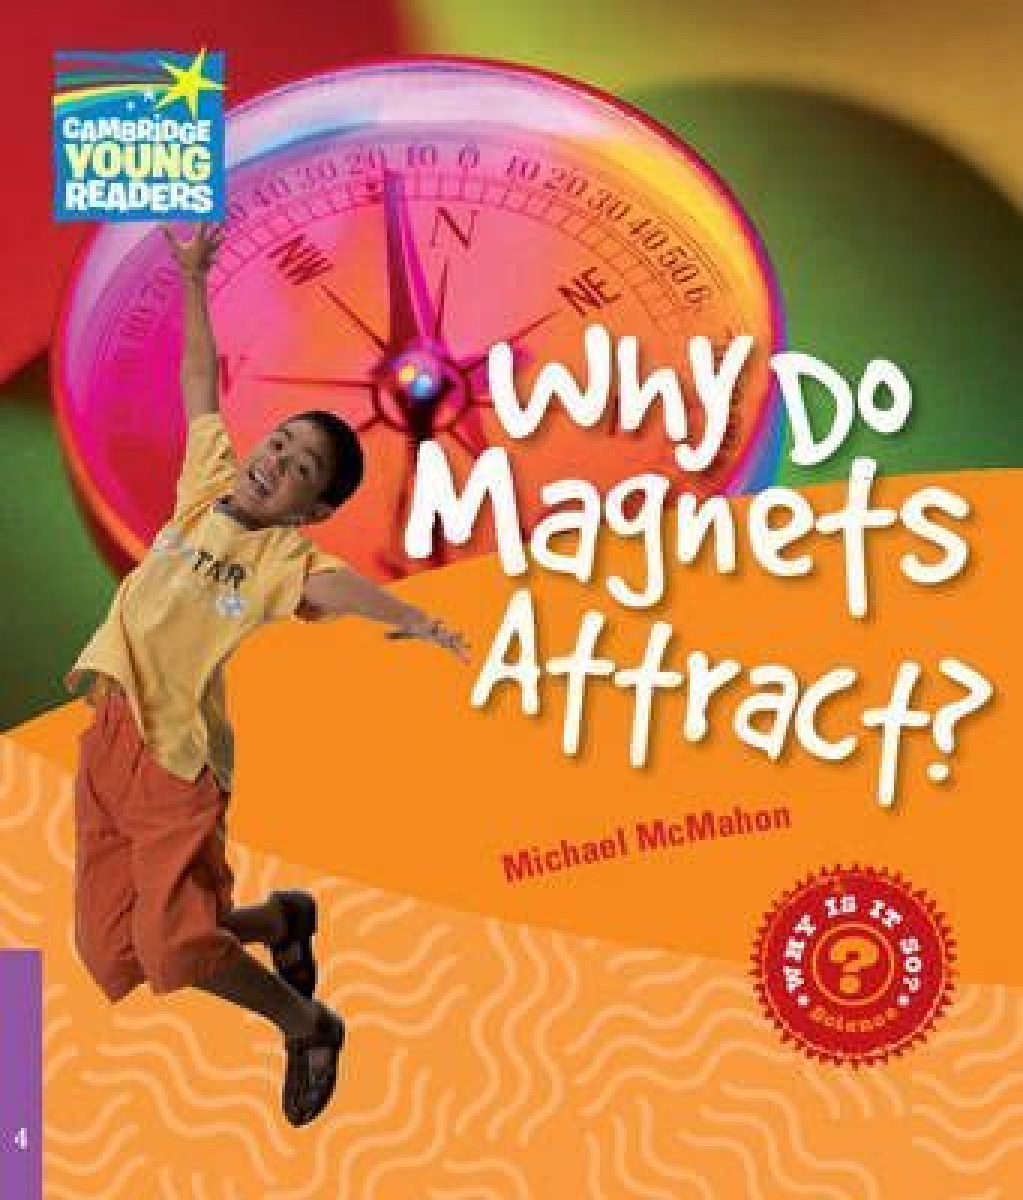 Michael McMahon Factbooks: Why is it so? Level 4 Why Do Magnets Attract? 